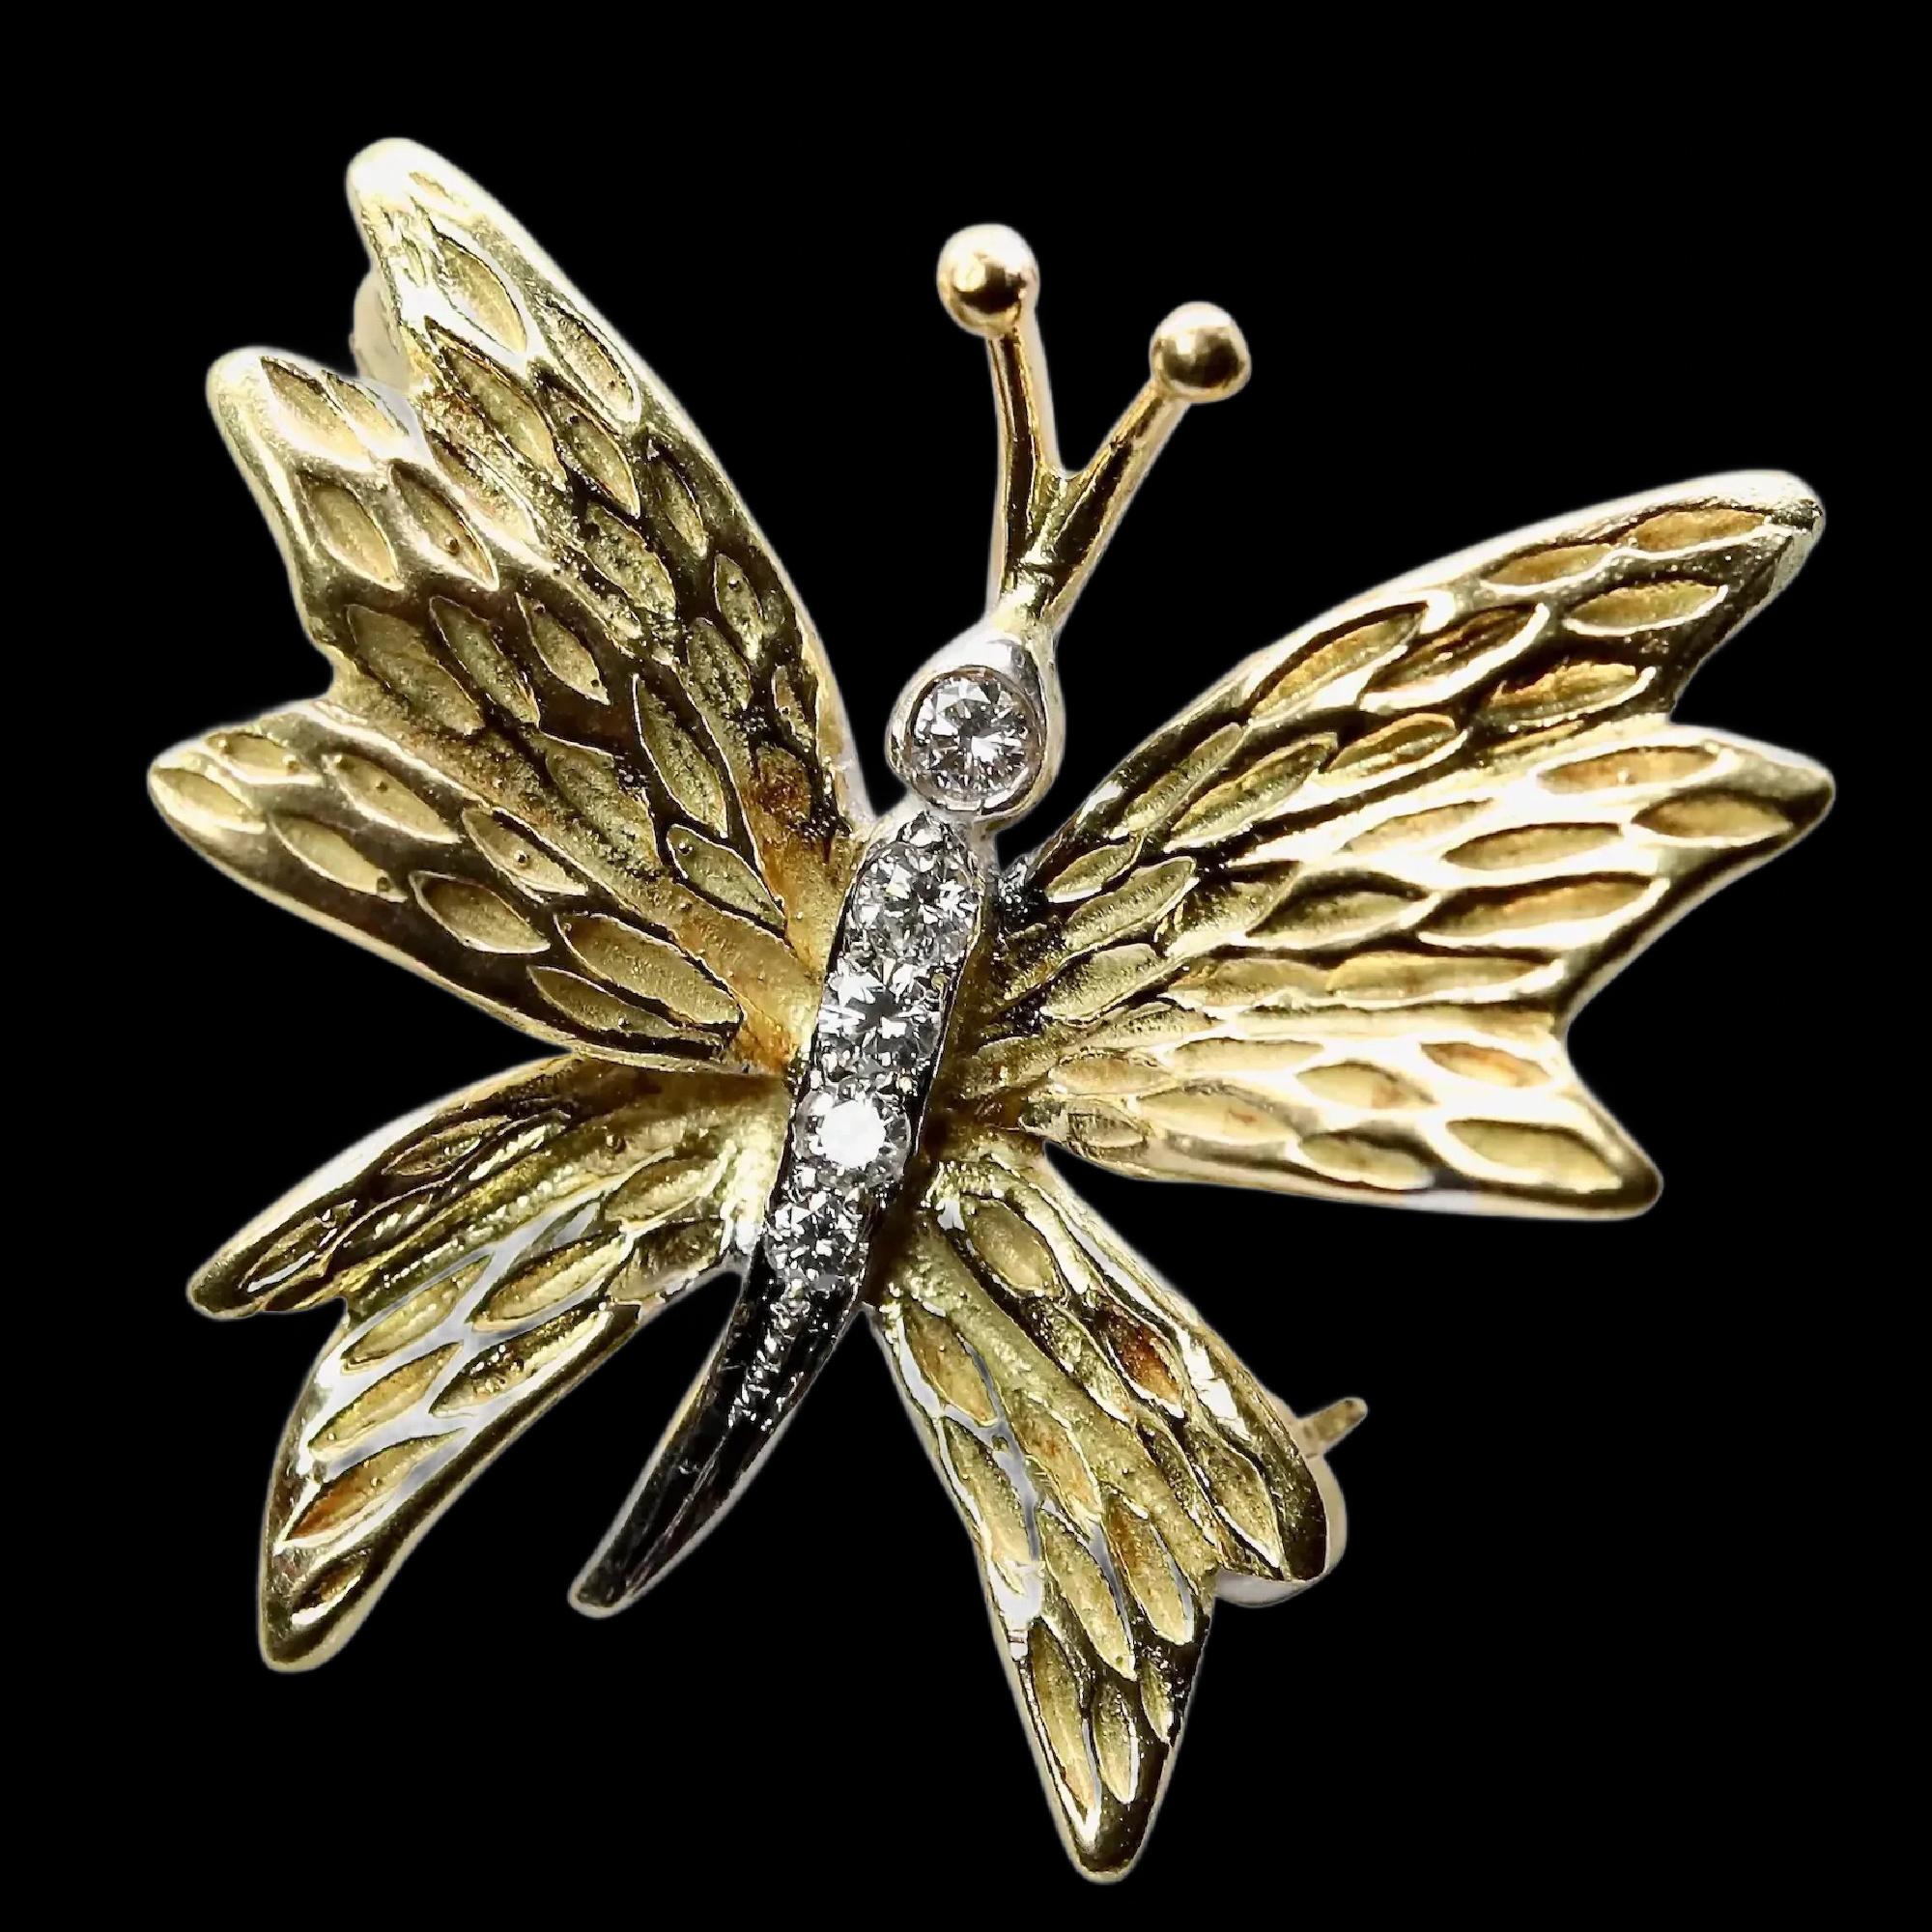 A vintage Tiffany & Company diamond butterfly brooch in 18 karat yellow gold. Accented by five diamonds weighing 0.10 carats and grading as F color, VVS clarity.

In excellent condition, this brooch is hallmarked as and tests as 18 karat gold.